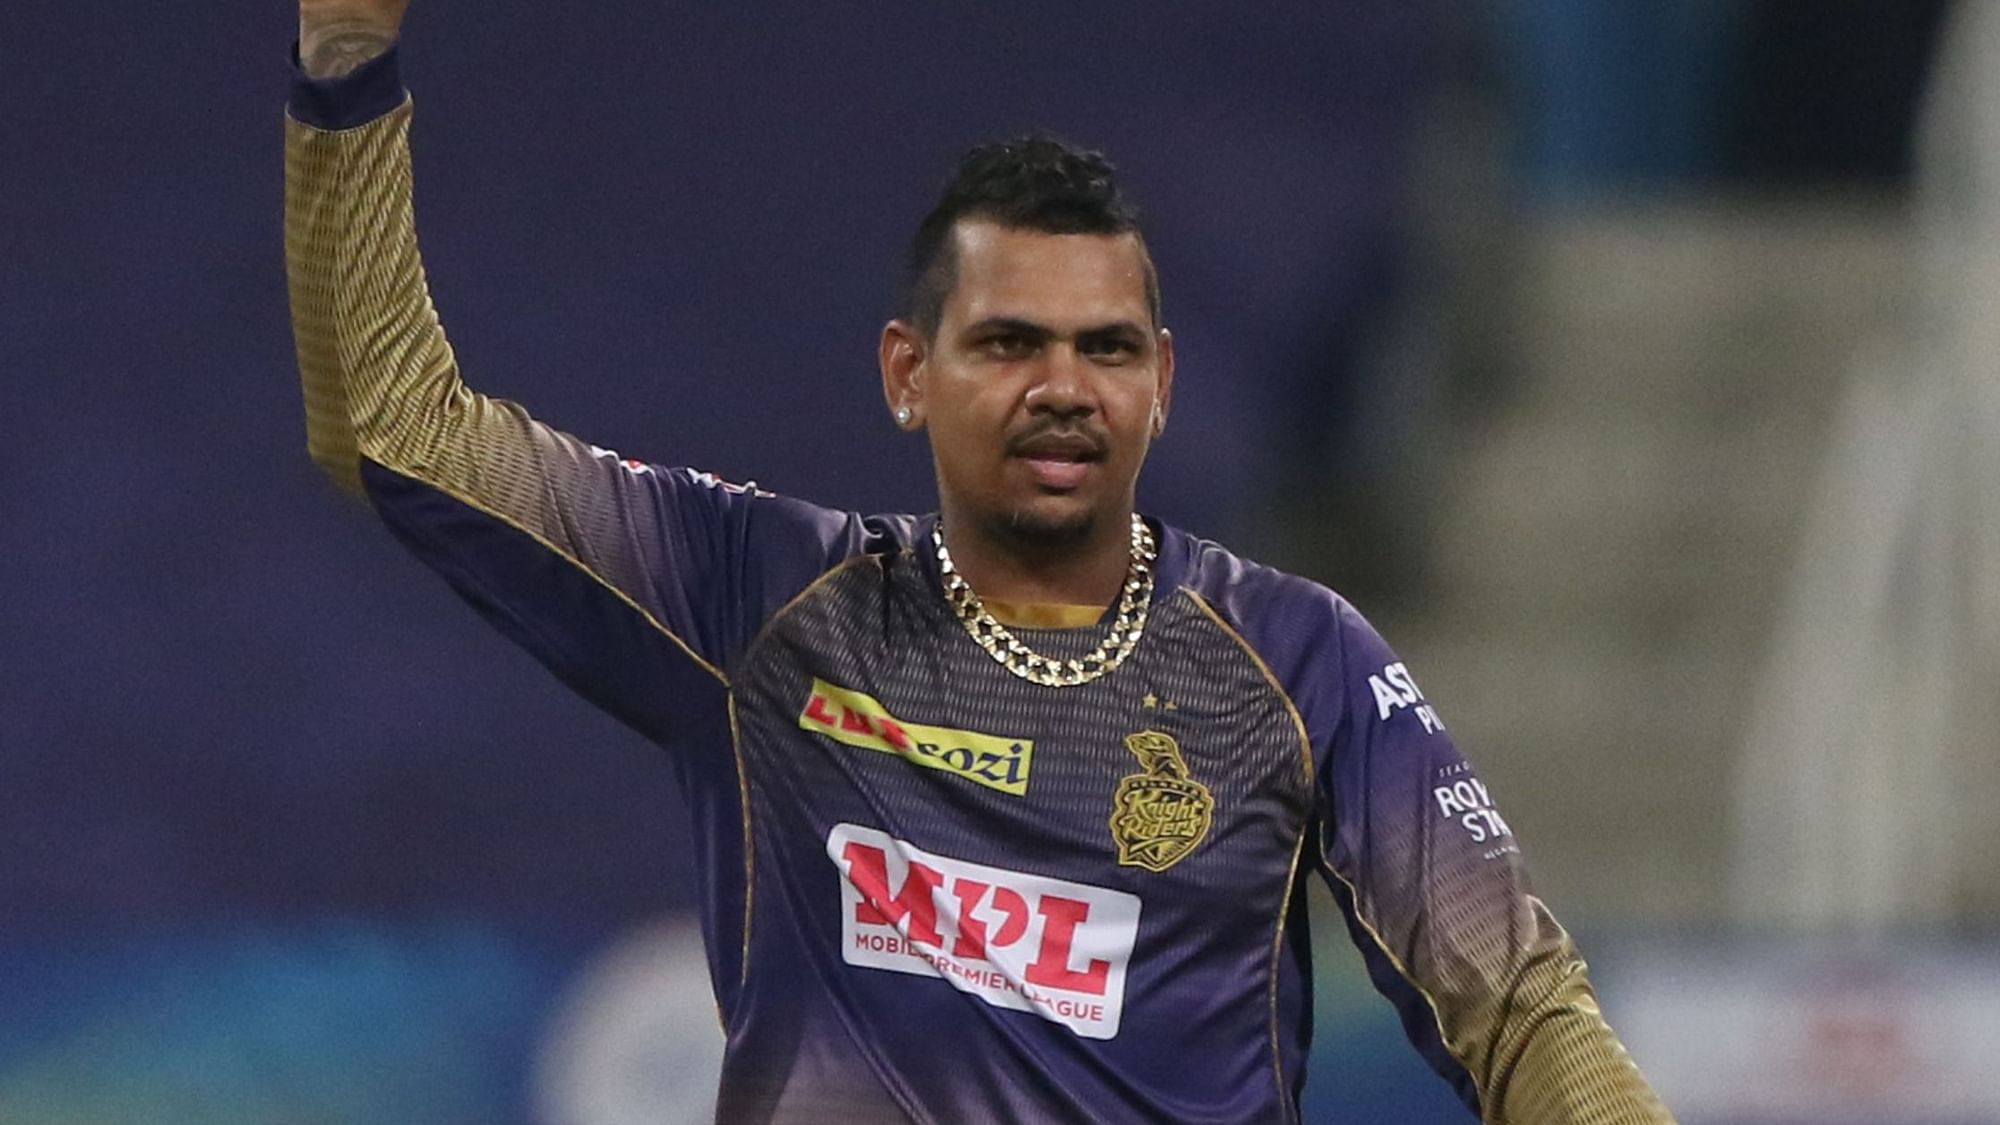 Sunil Narine may need to make use of a video analyst’s footage instead of a 3D biomechanical test to check for fault in his action.